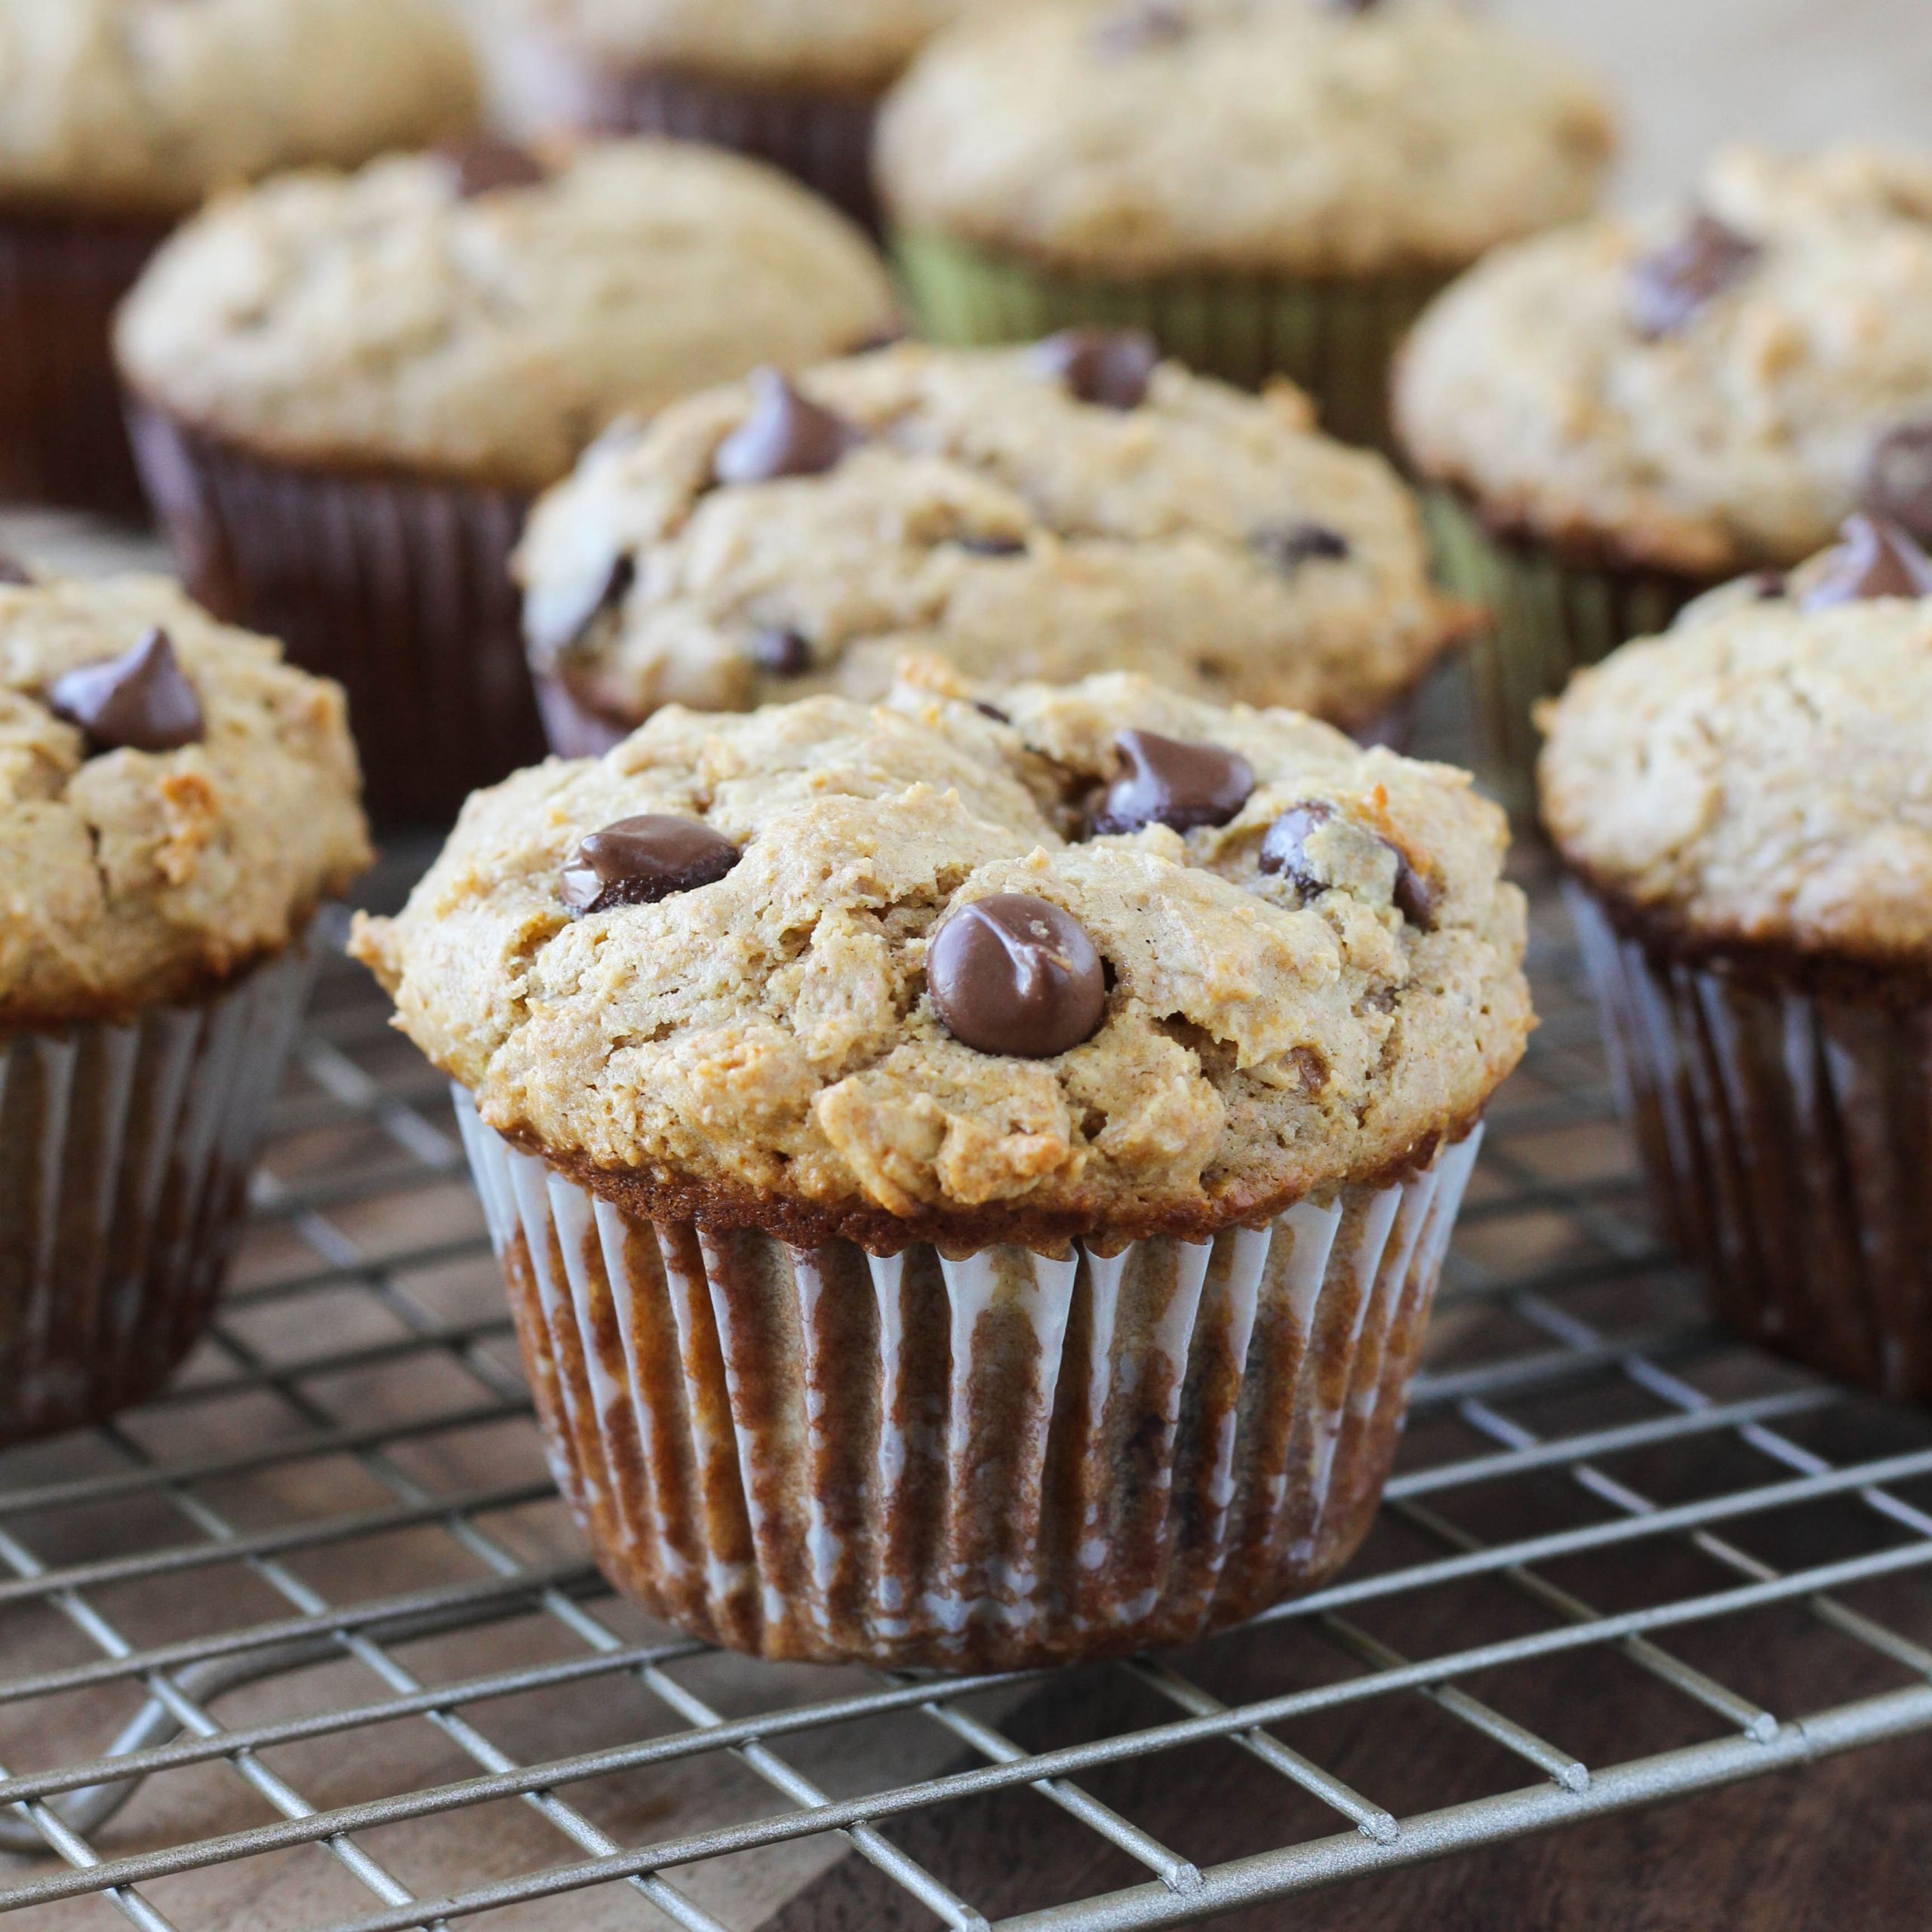 Healthy Chocolate Chip Muffins
 Healthy Peanut Butter Chocolate Chip Muffins